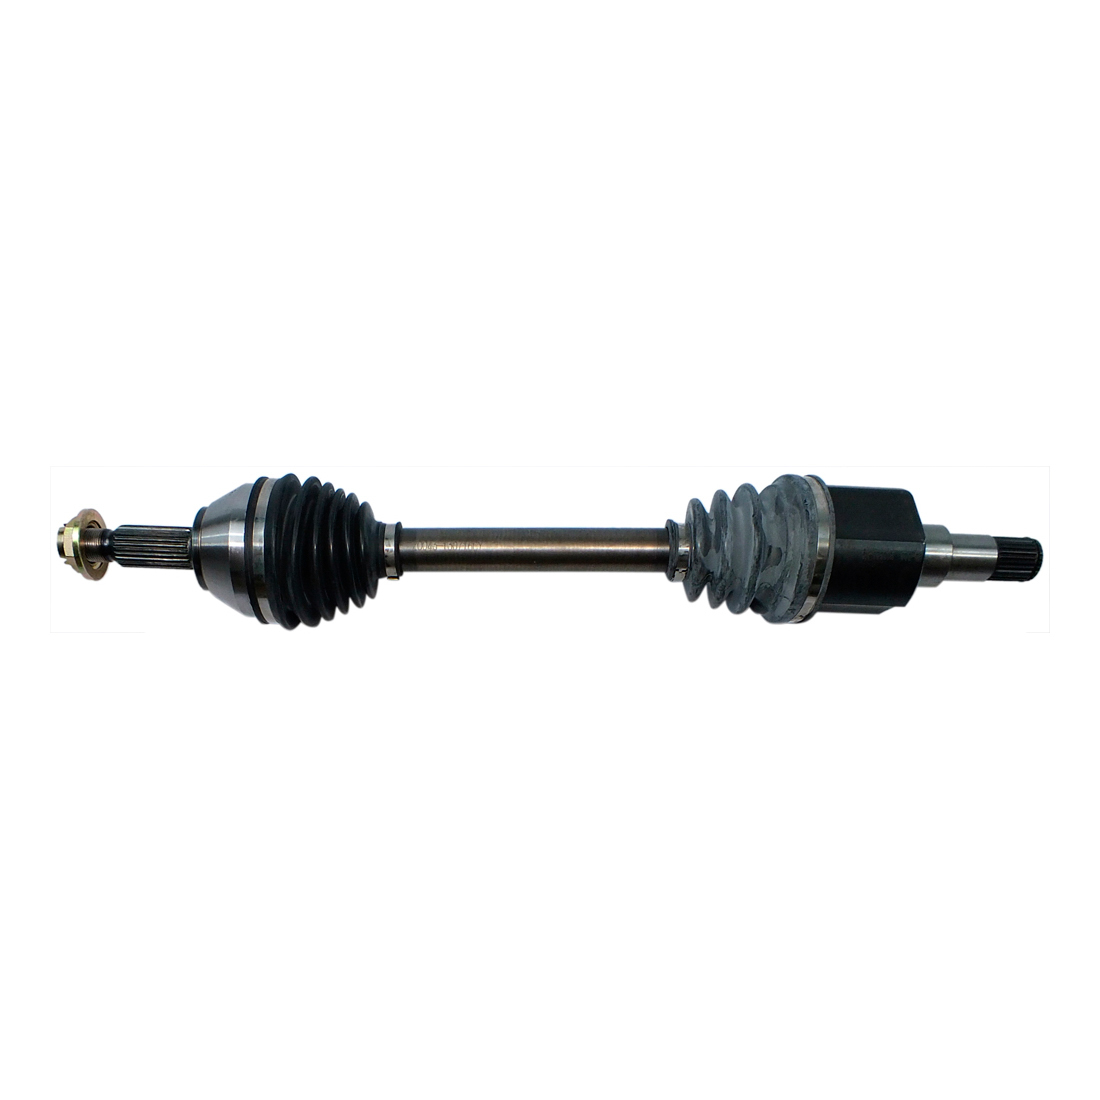  Ford transit connect drive axle front 